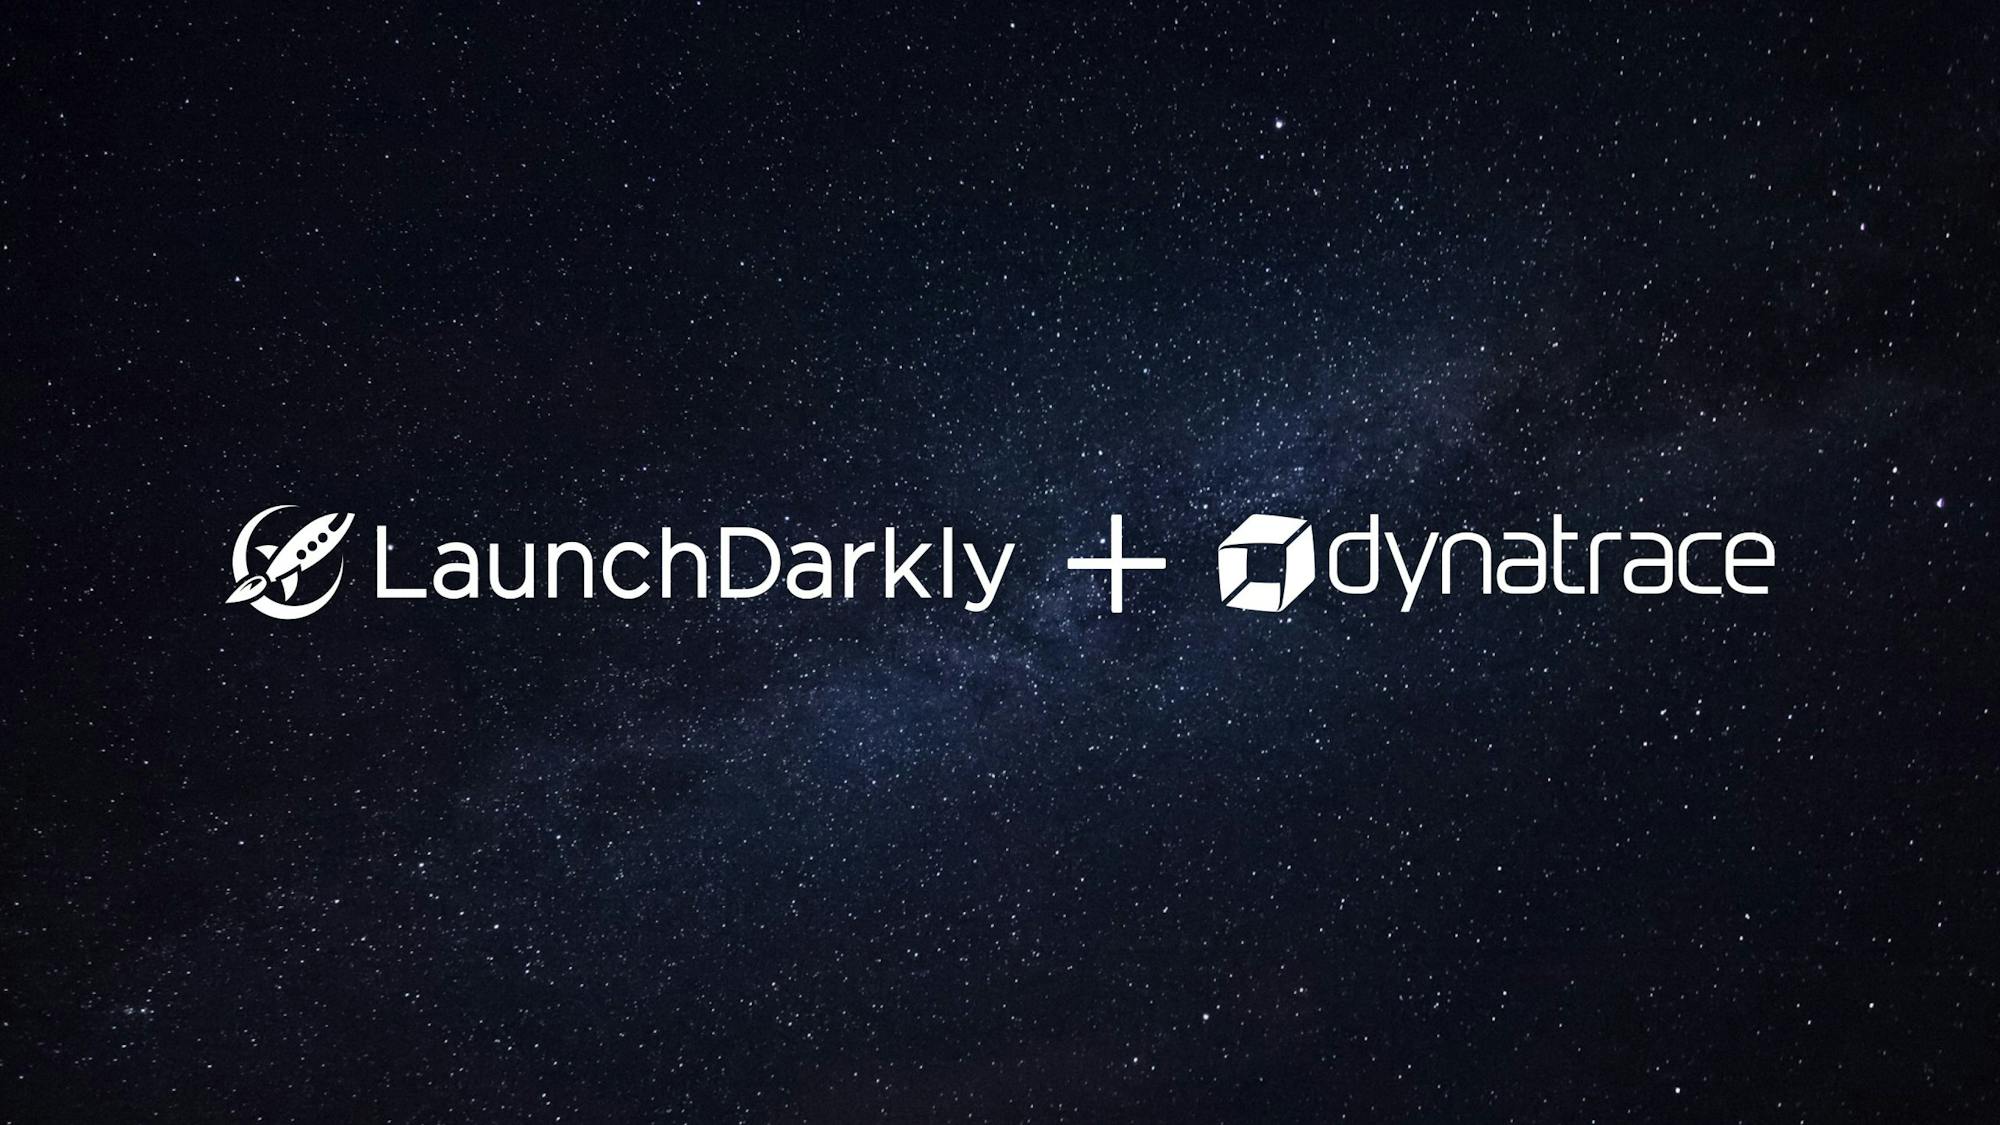 Launched: Dynatrace Integration featured image